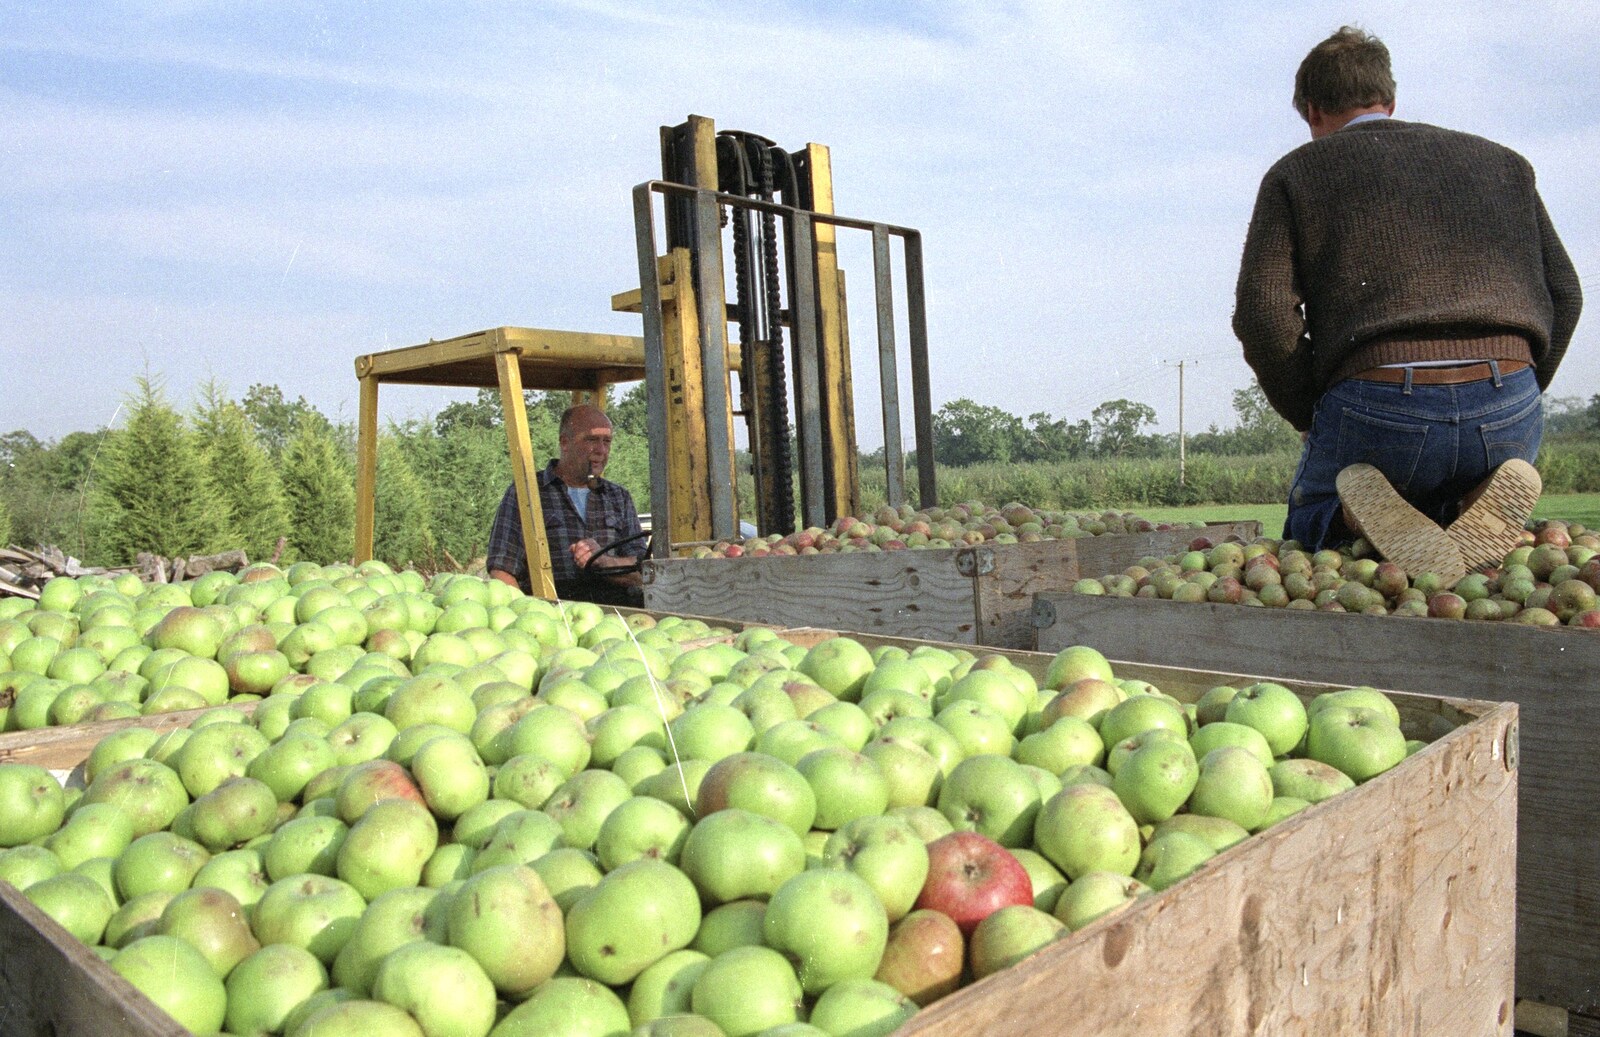 Geoff checks the loading from Cider Making, Stuston, Suffolk - 14th October 1991